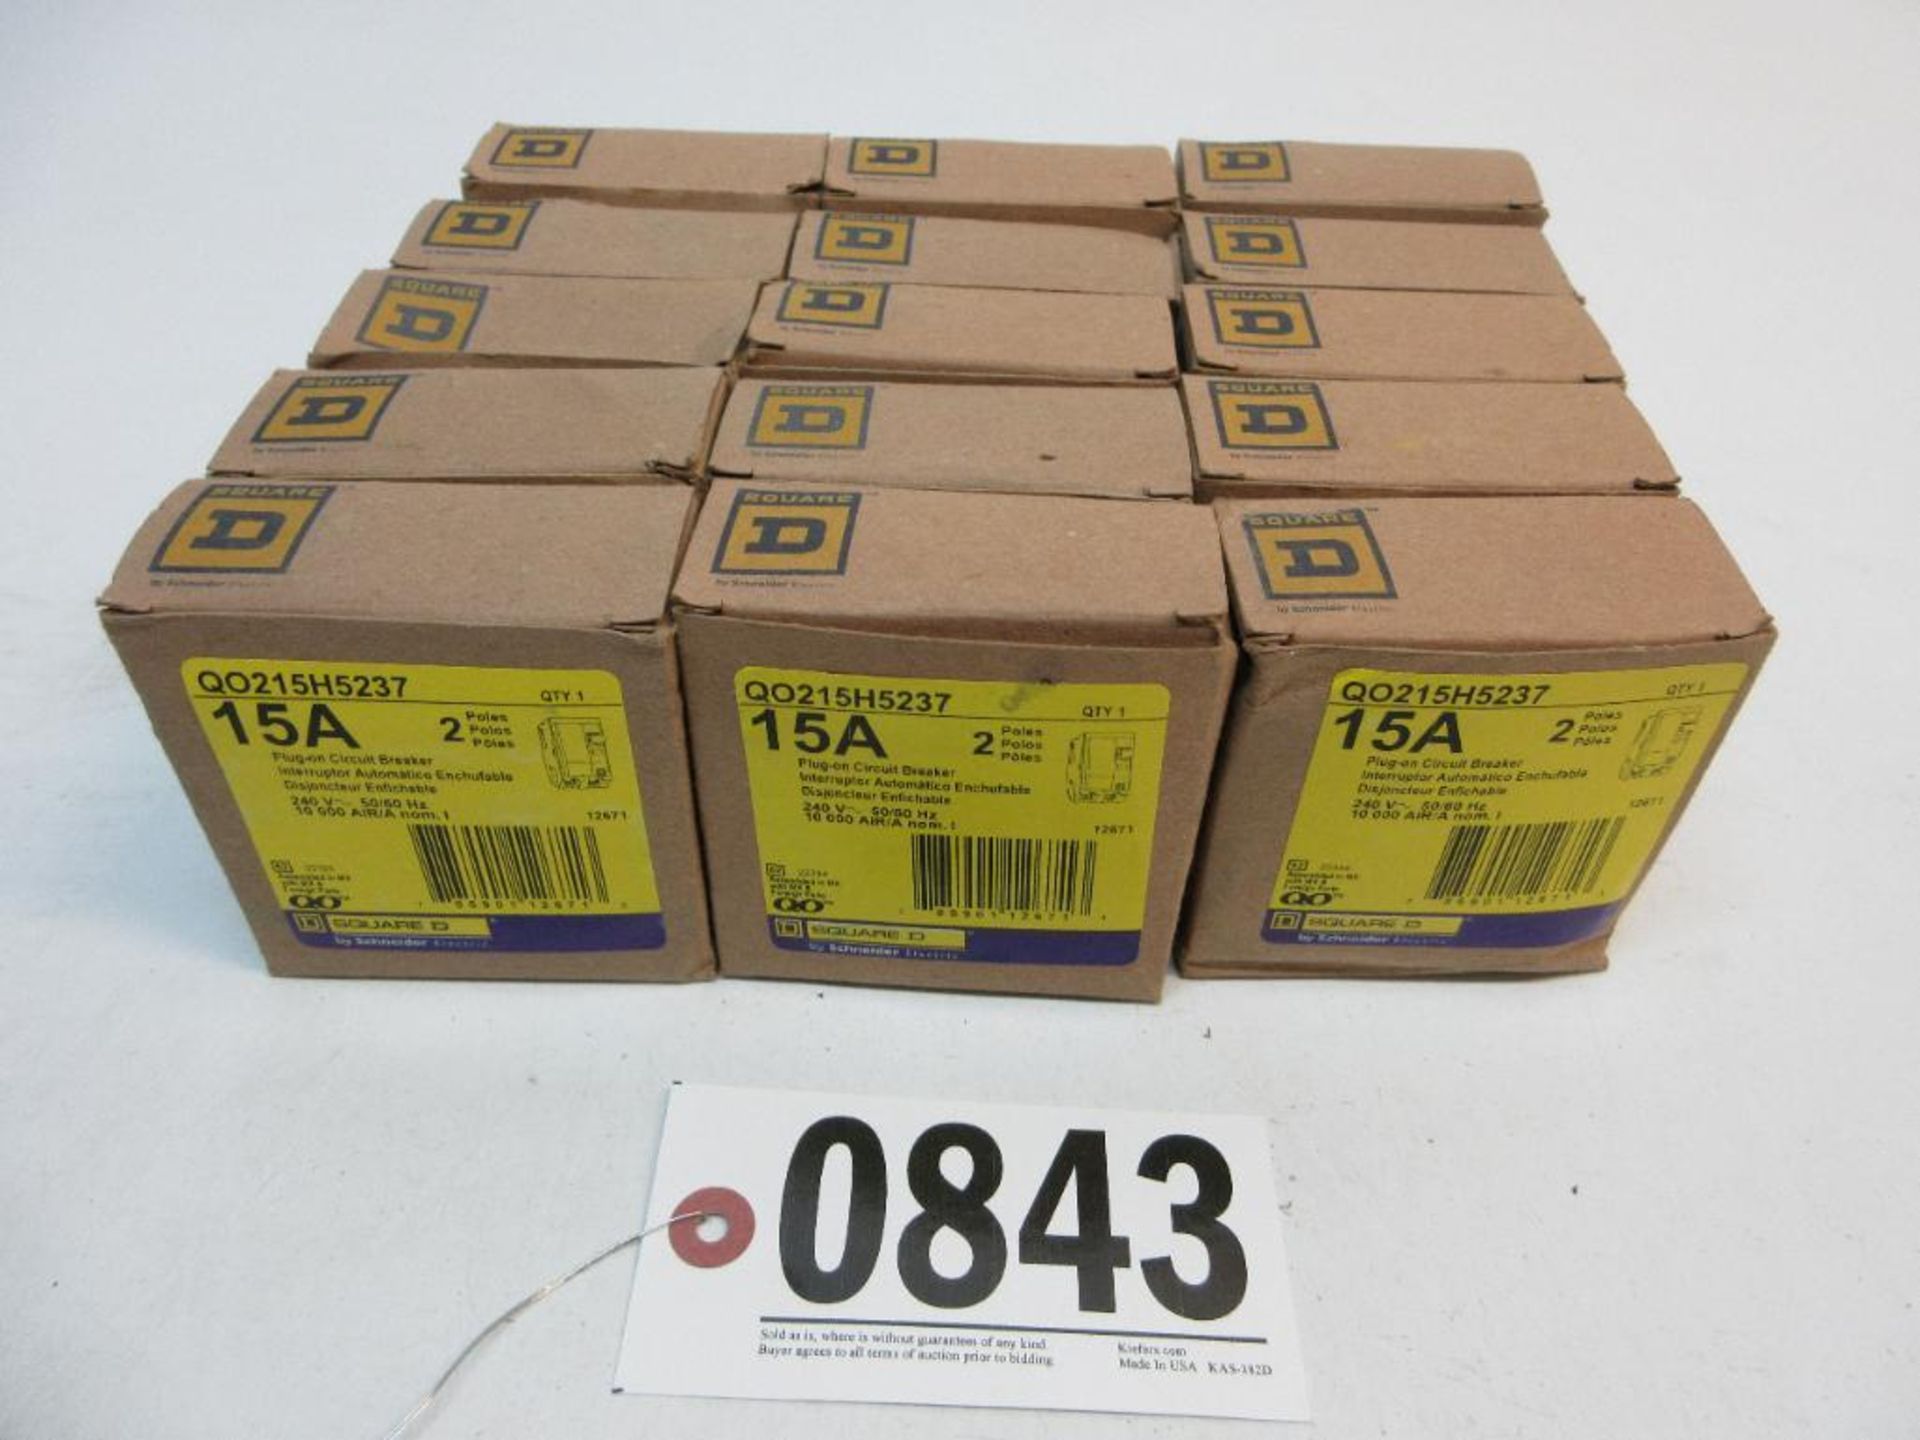 (15) SQUARE D QO215H5237 PLUG-ON CIRCUIT BREAKERS 15A 2 POLE NEW (THIS LOT IS FOB CAMARILLO CA) - (T